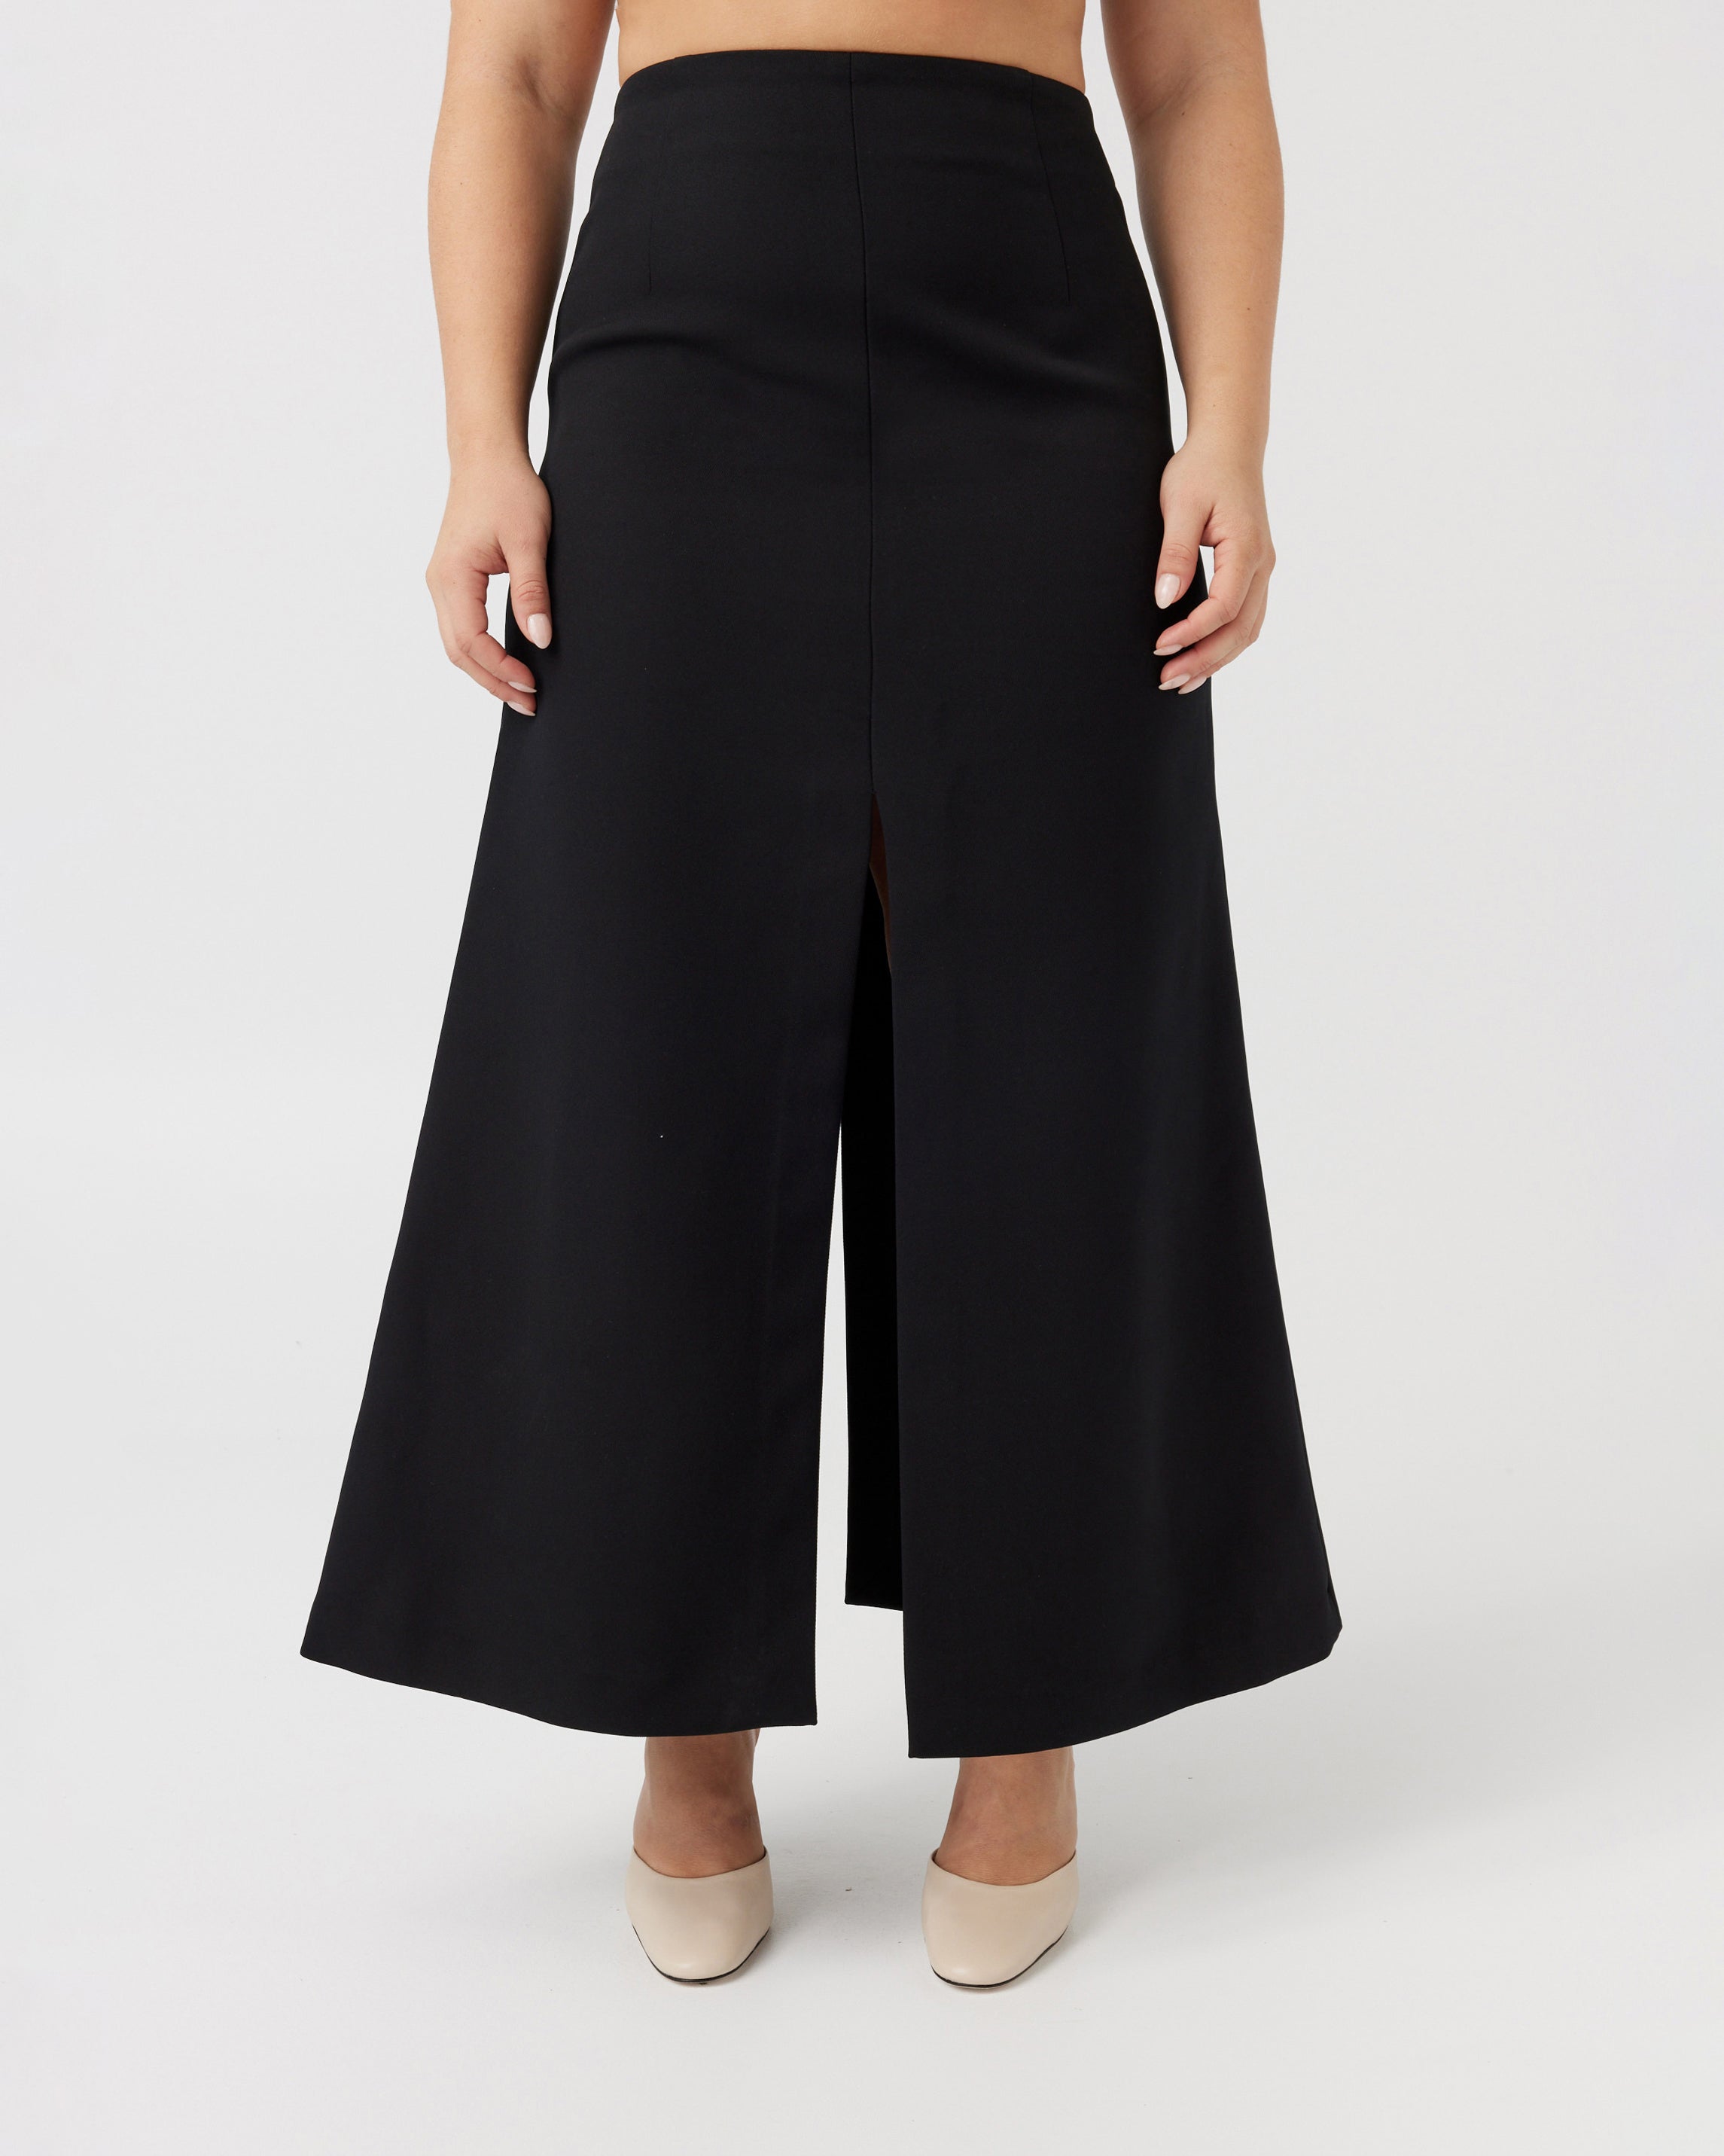 Woman with a curvaceous figure wearing a high-waisted maxi length black skirt with middle split.